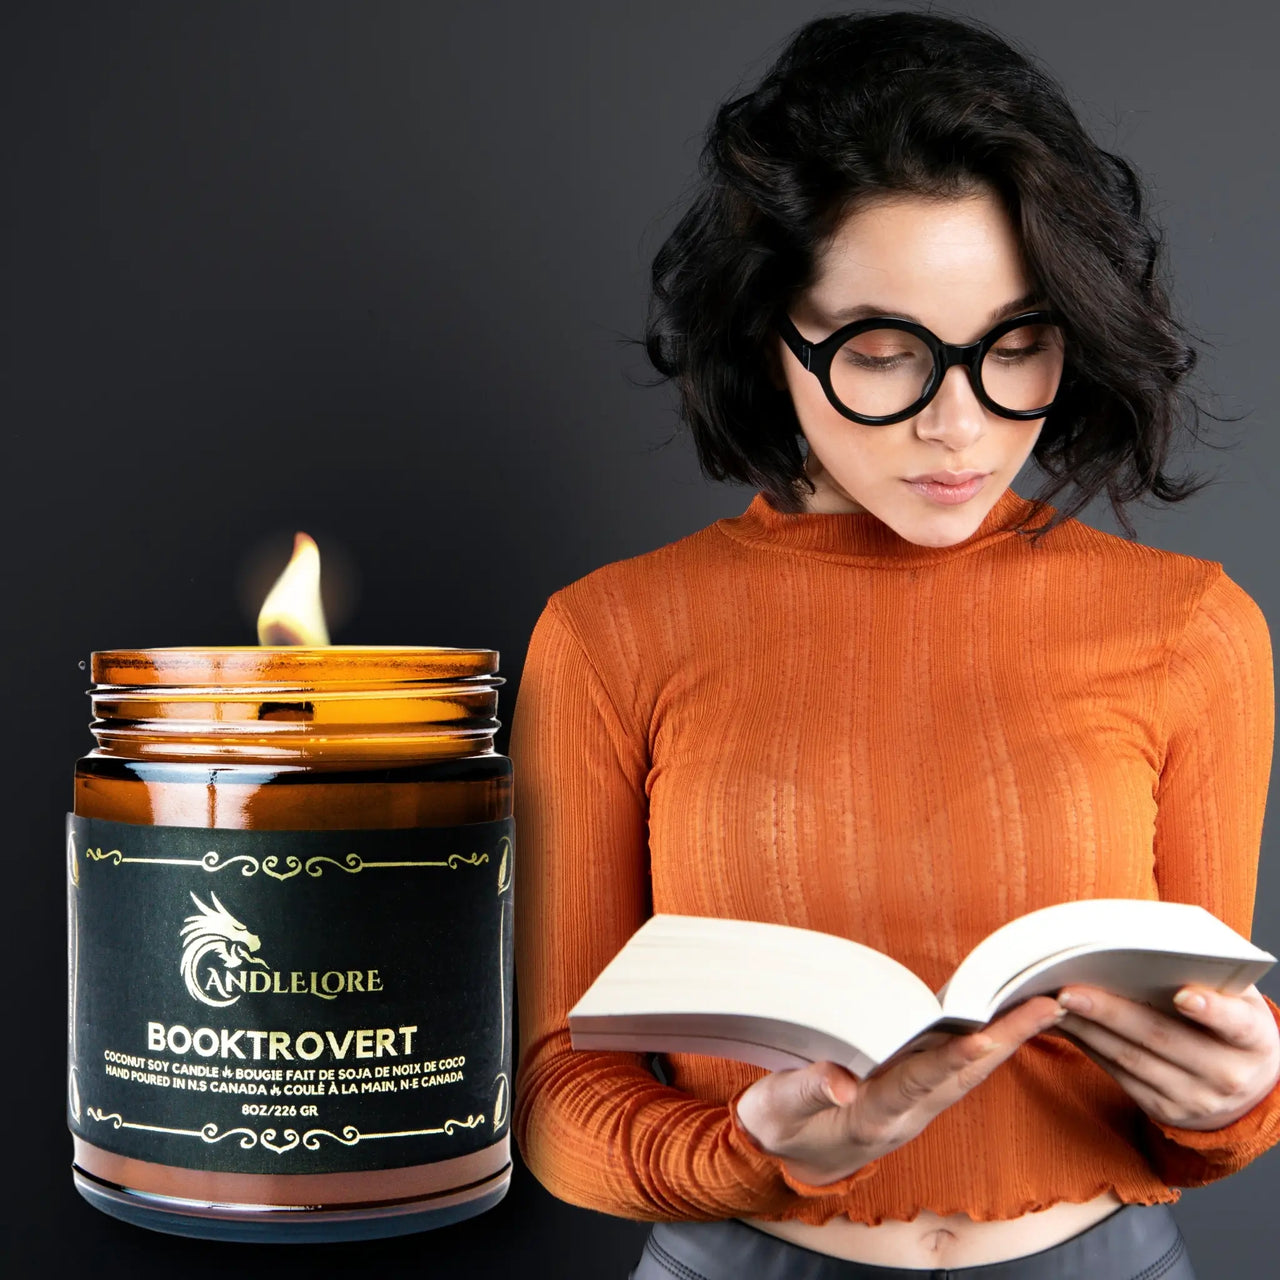 Booktrovert Candle with a person reading intently beside it